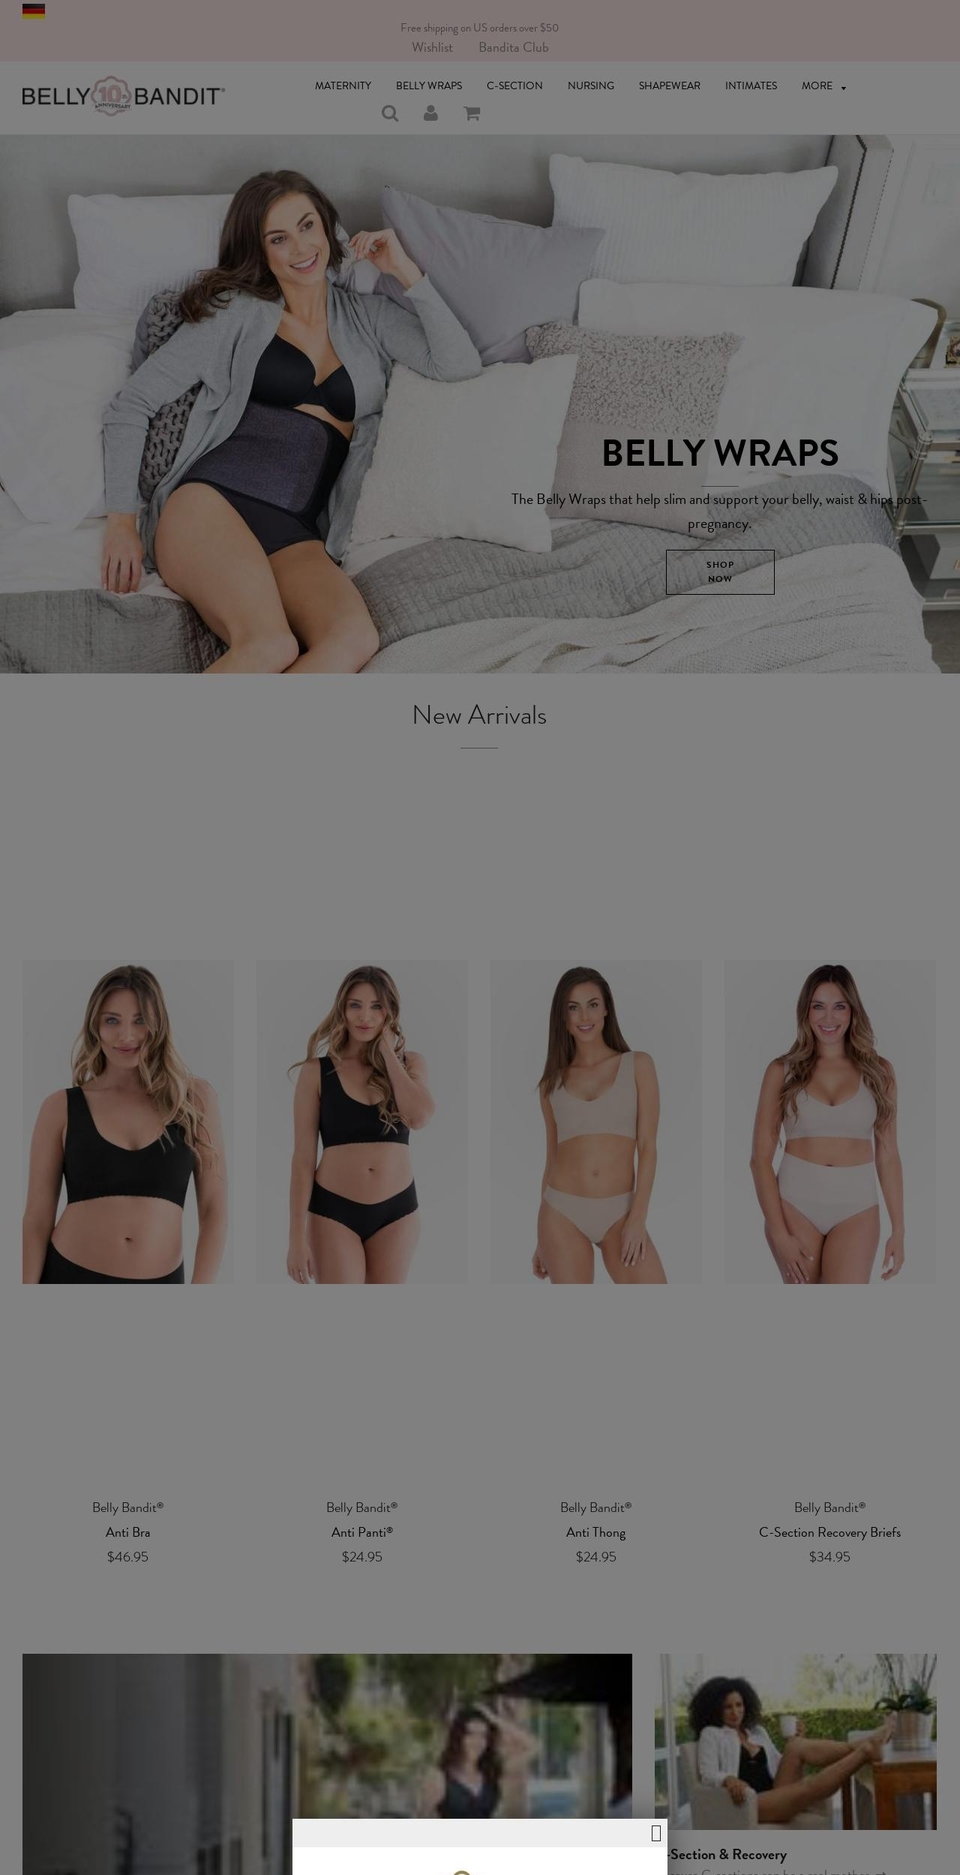 Copy of Flow Shopify theme site example bellybandit.org